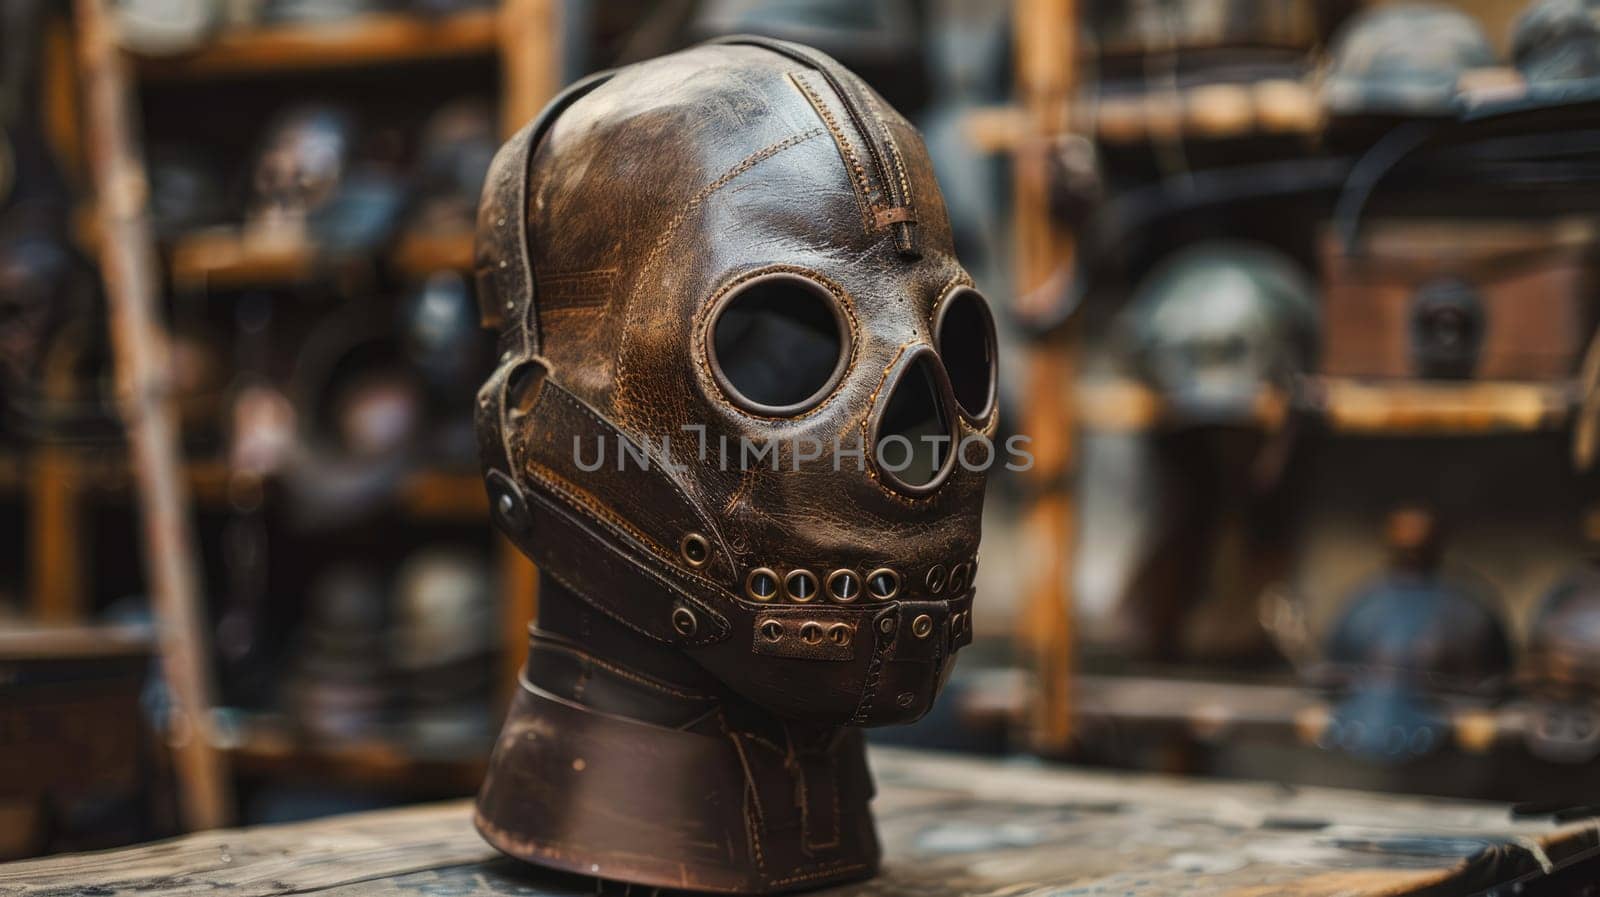 Medieval Leather face mask. BDSM mask or accessory for a horror movie costume AI